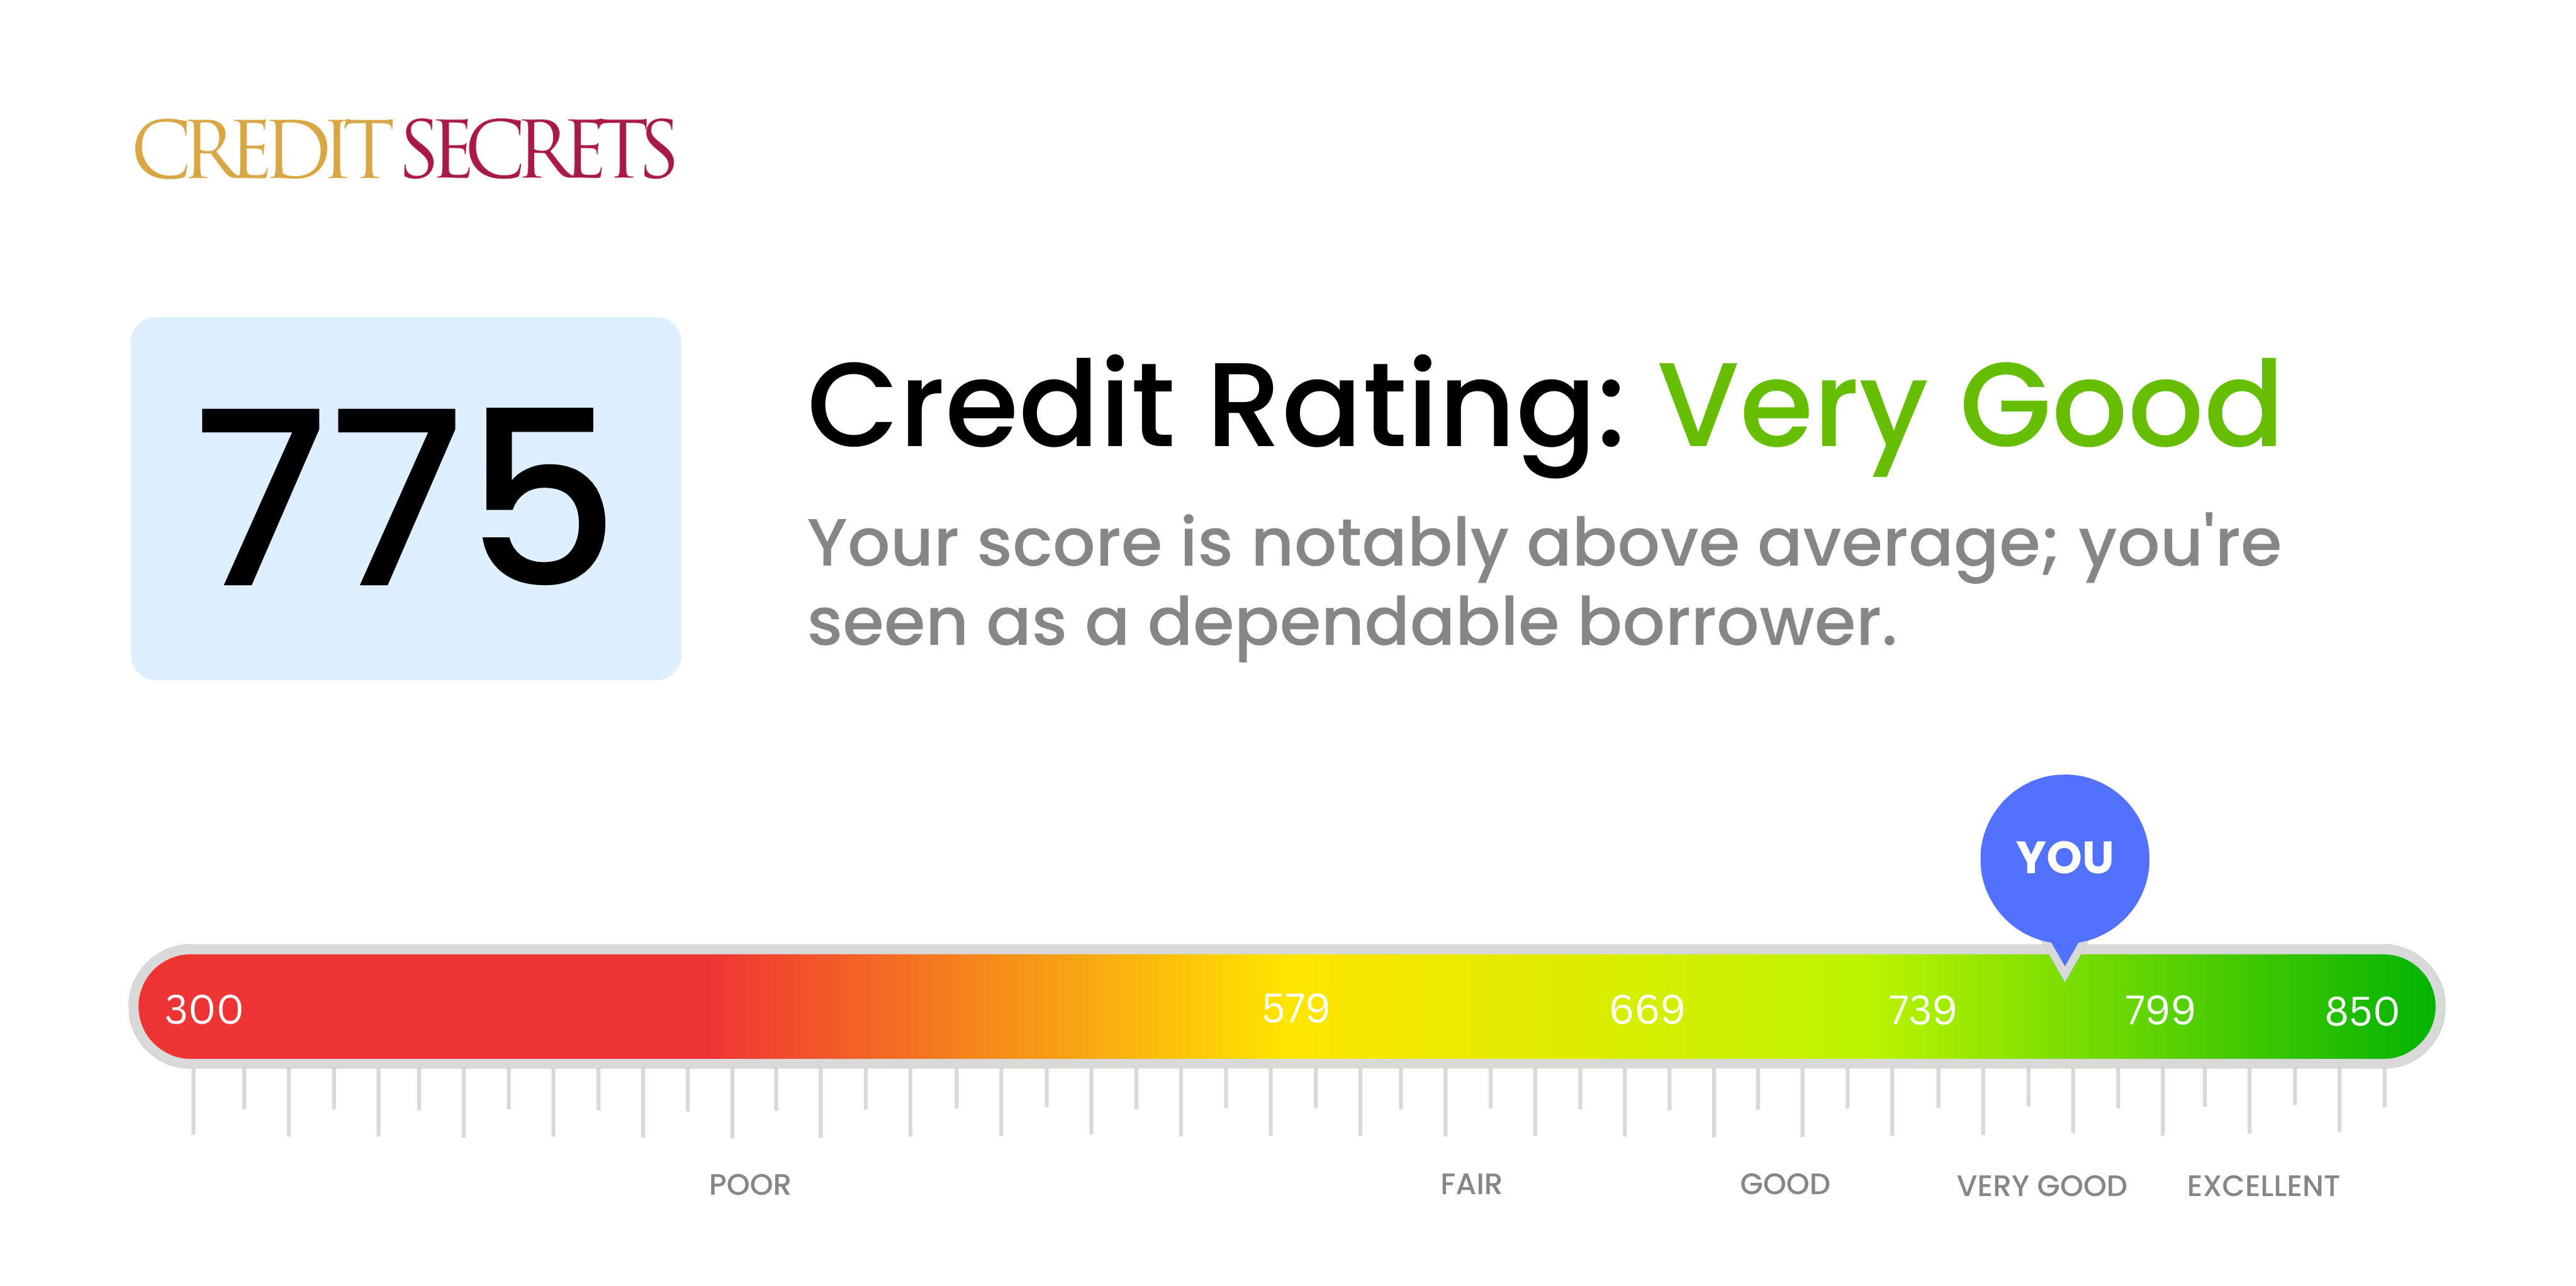 Is 775 a good credit score?